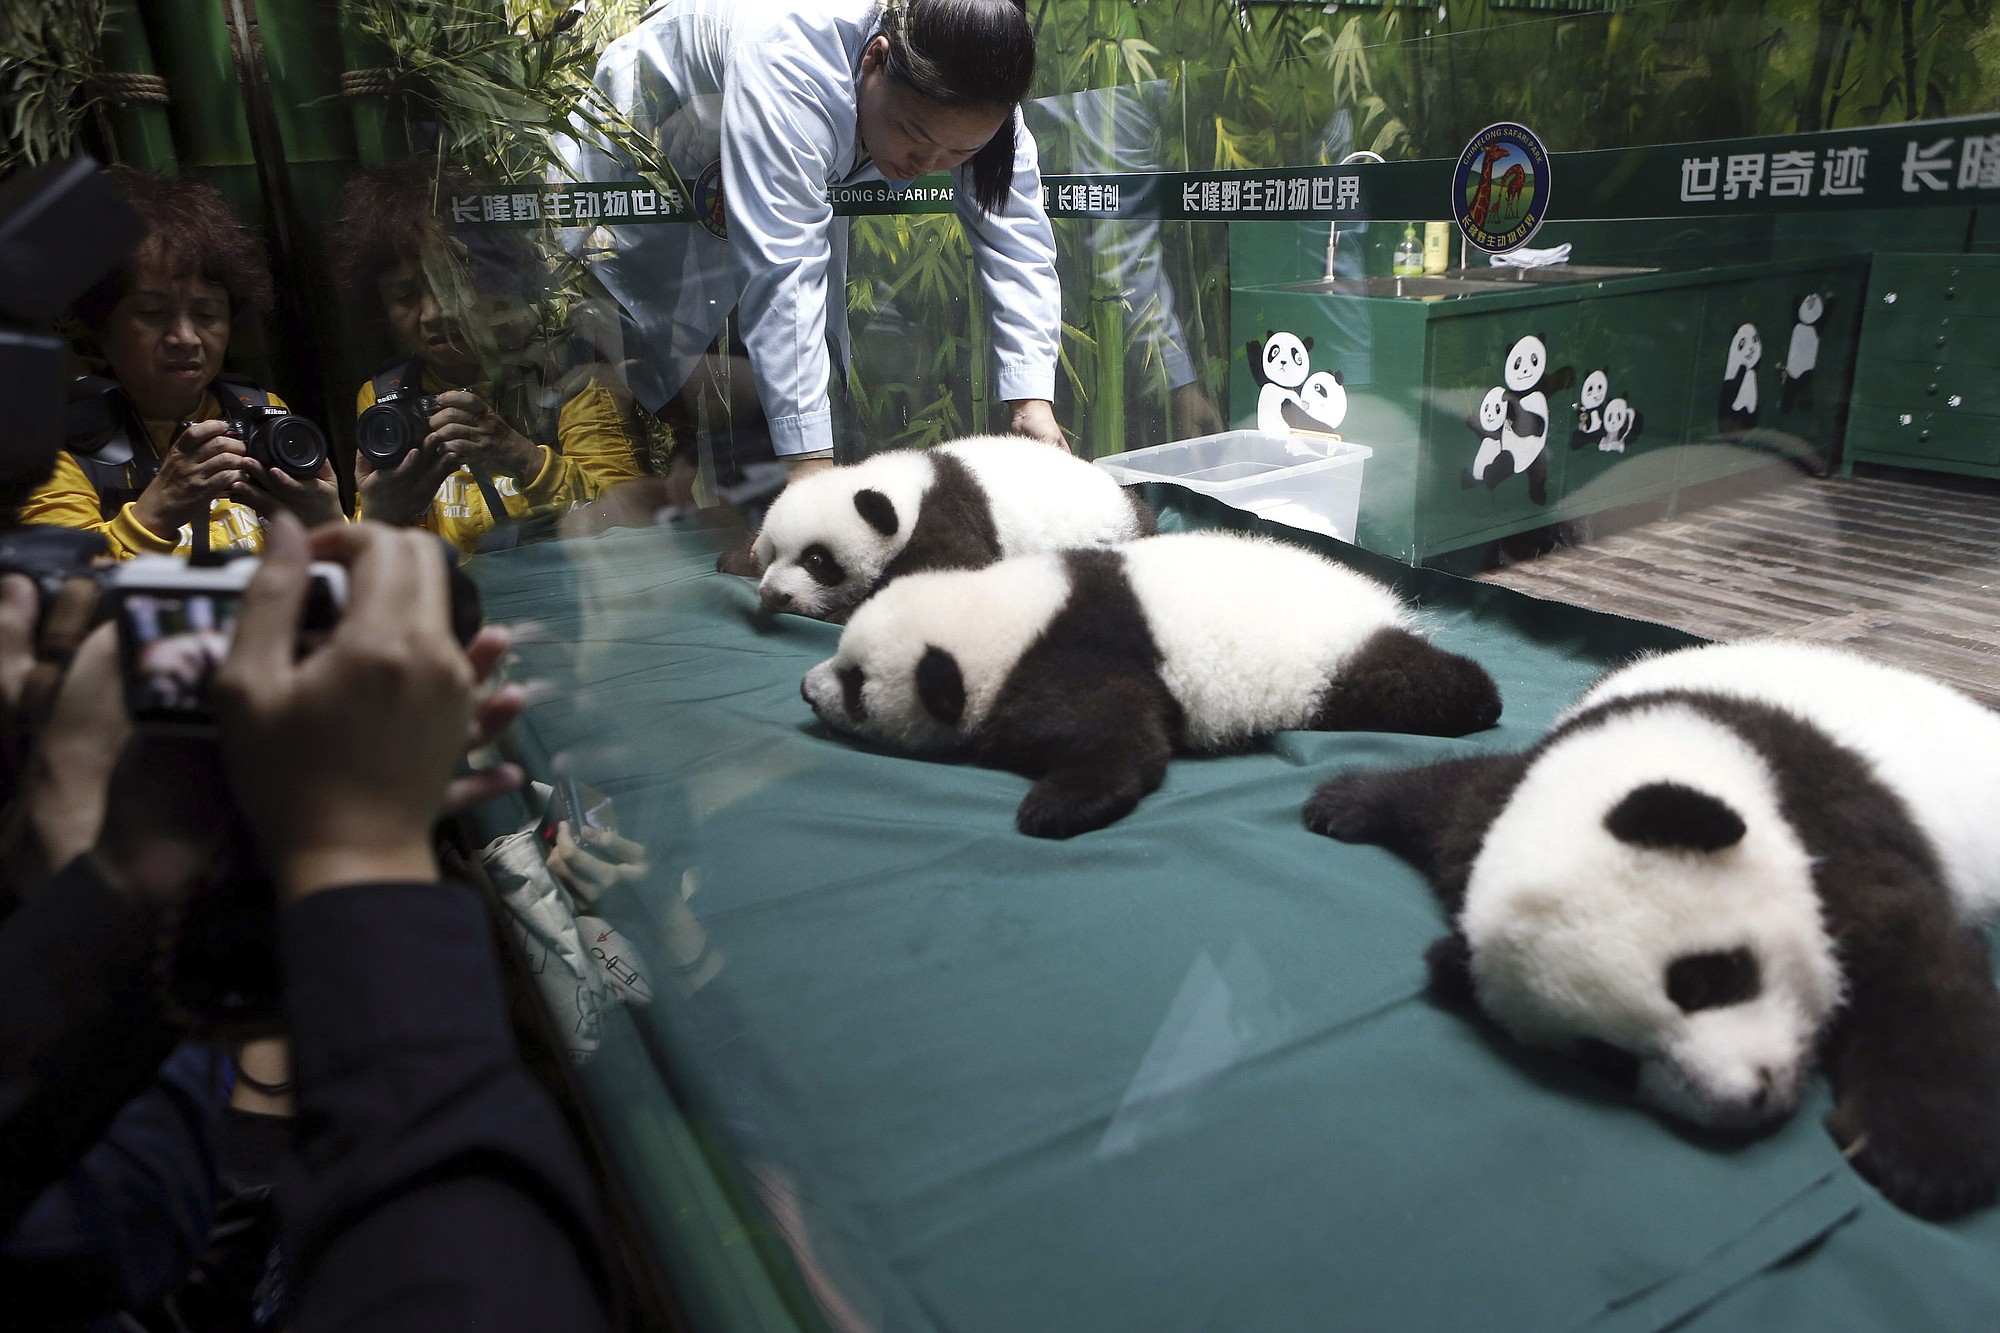 Associated Press
Visitors take photos of the panda triplet cubs in the Chimelong Safari Park in Guangzhou in south China's Guangdong province Wednesday. Keepers responsible for looking after the world's only surviving set of giant panda triplets said the cubs were doing well, as they celebrated turning 100 days old on Wednesday. The triplets born at Chimelong are the fourth case of panda triplets ever recorded.